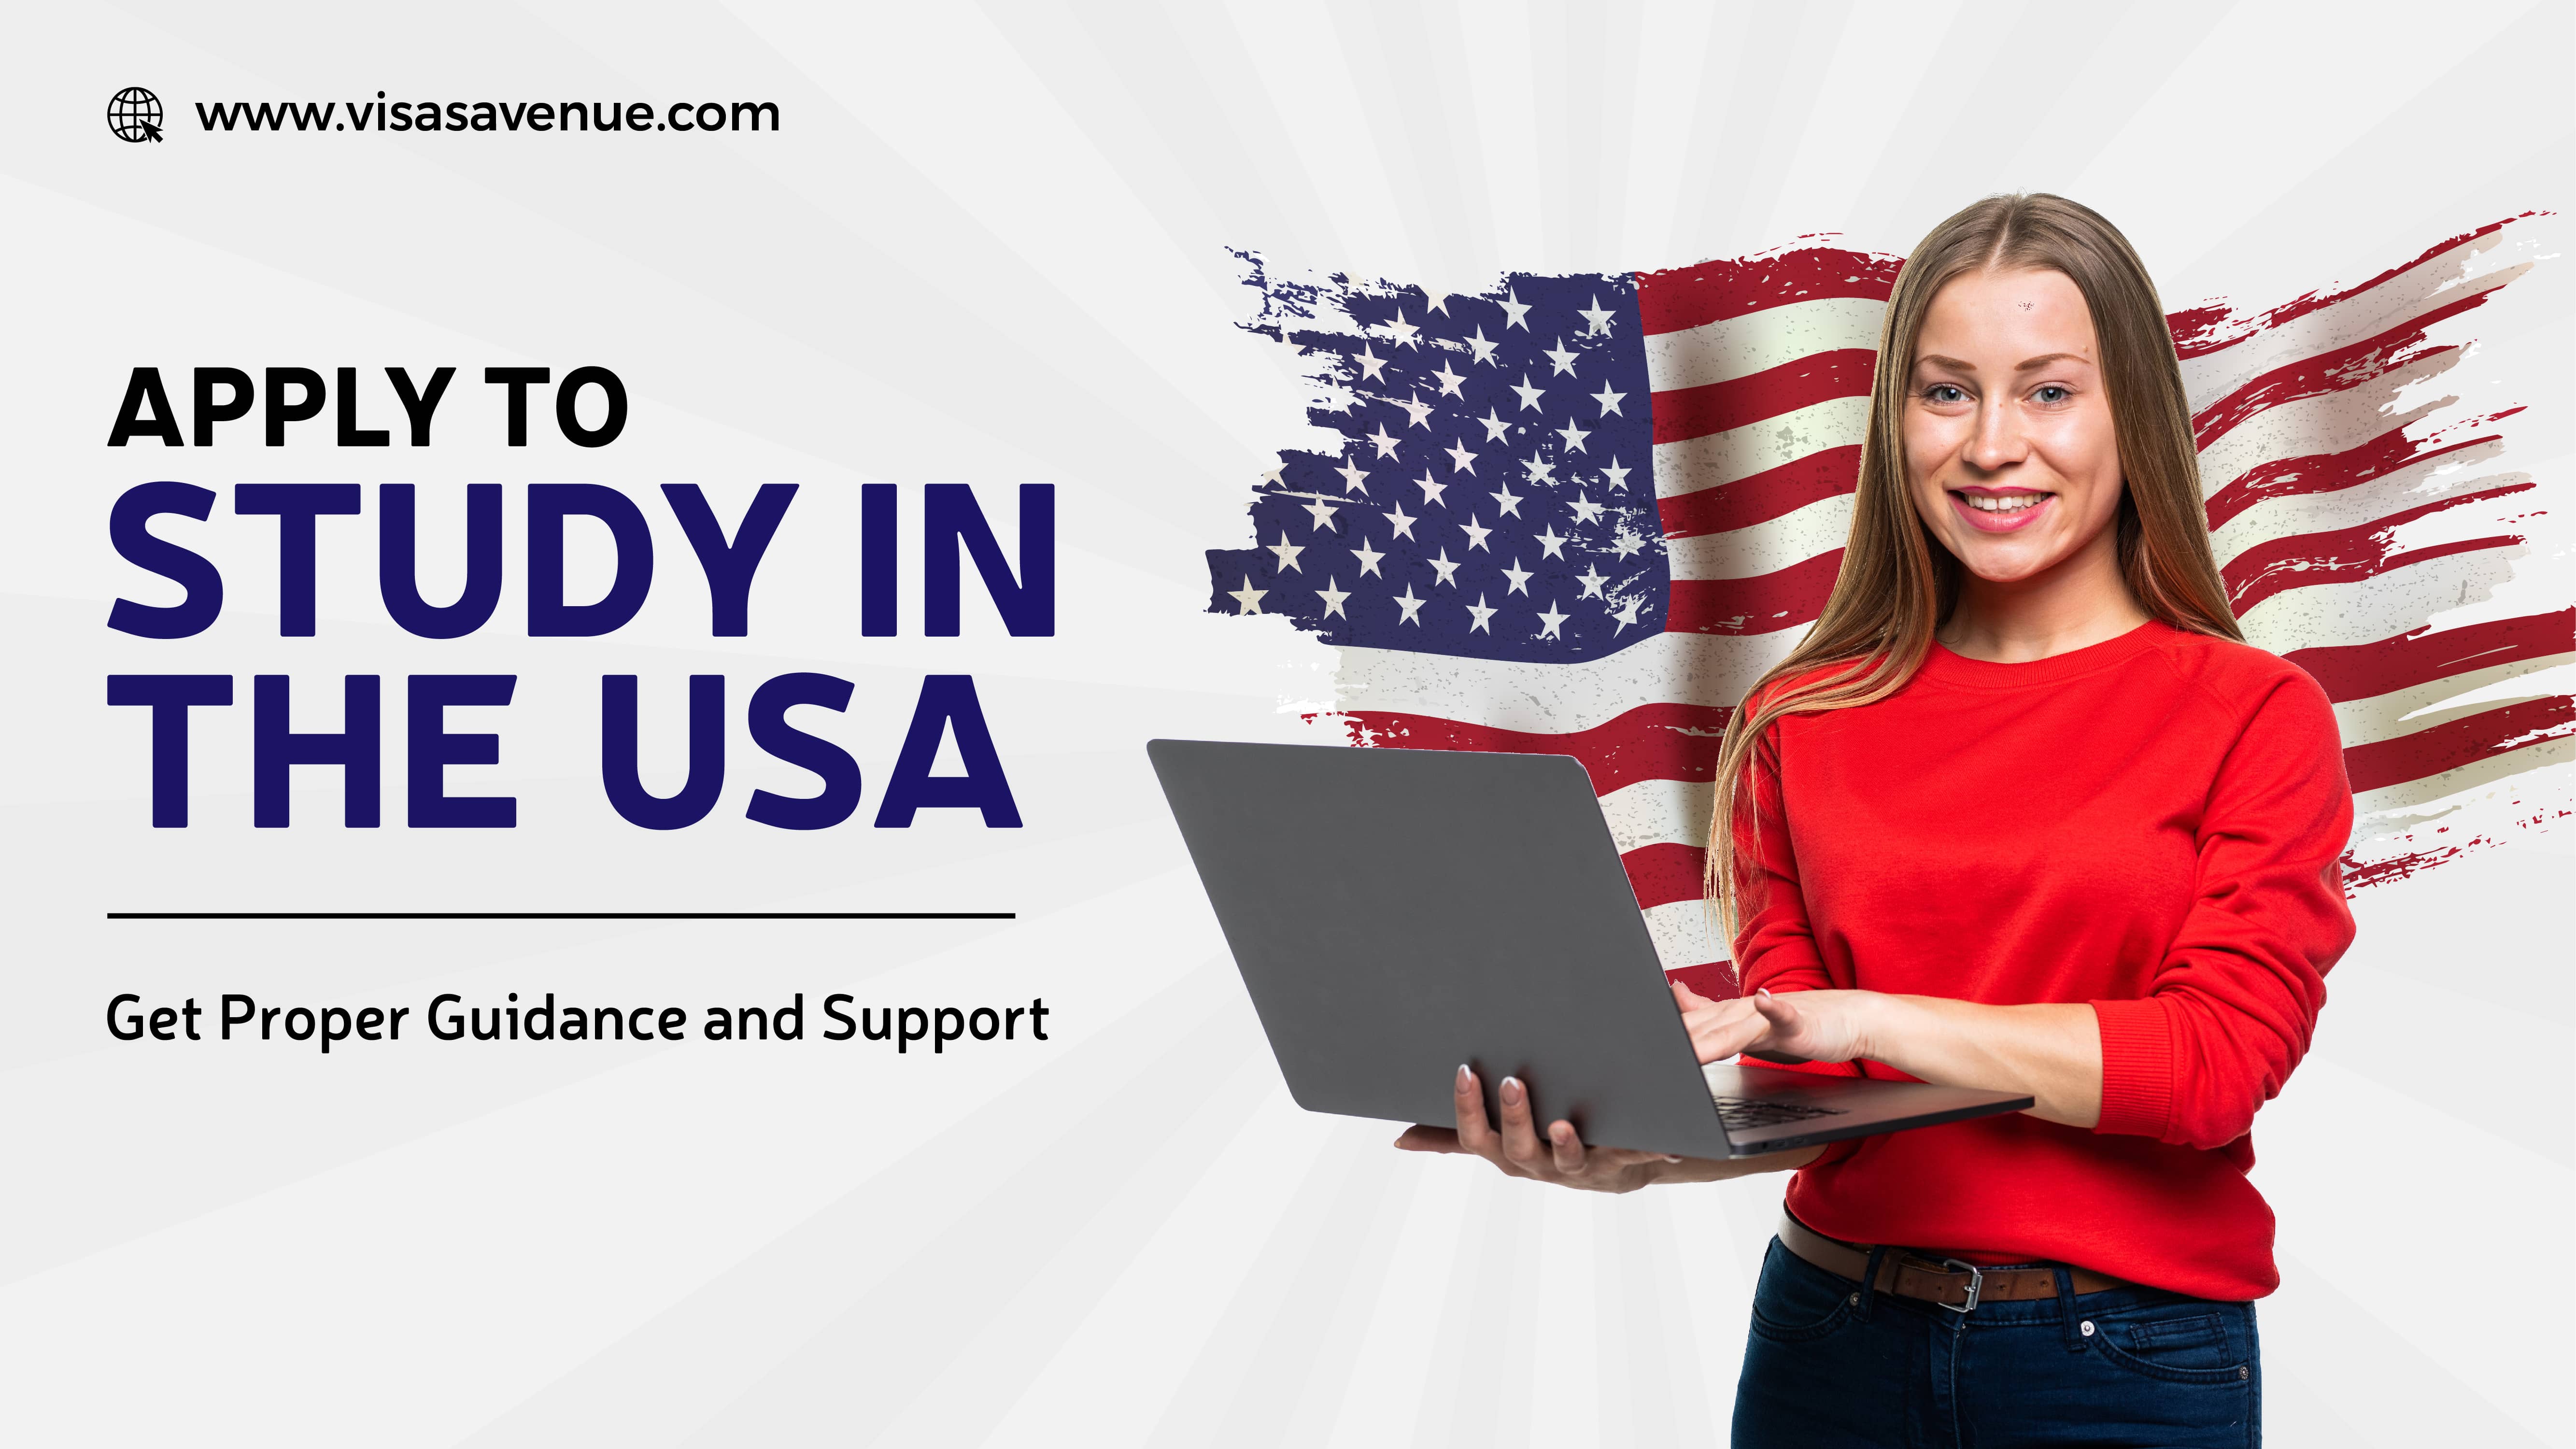 Apply to Study in the USA- Get Proper Guidance and Support